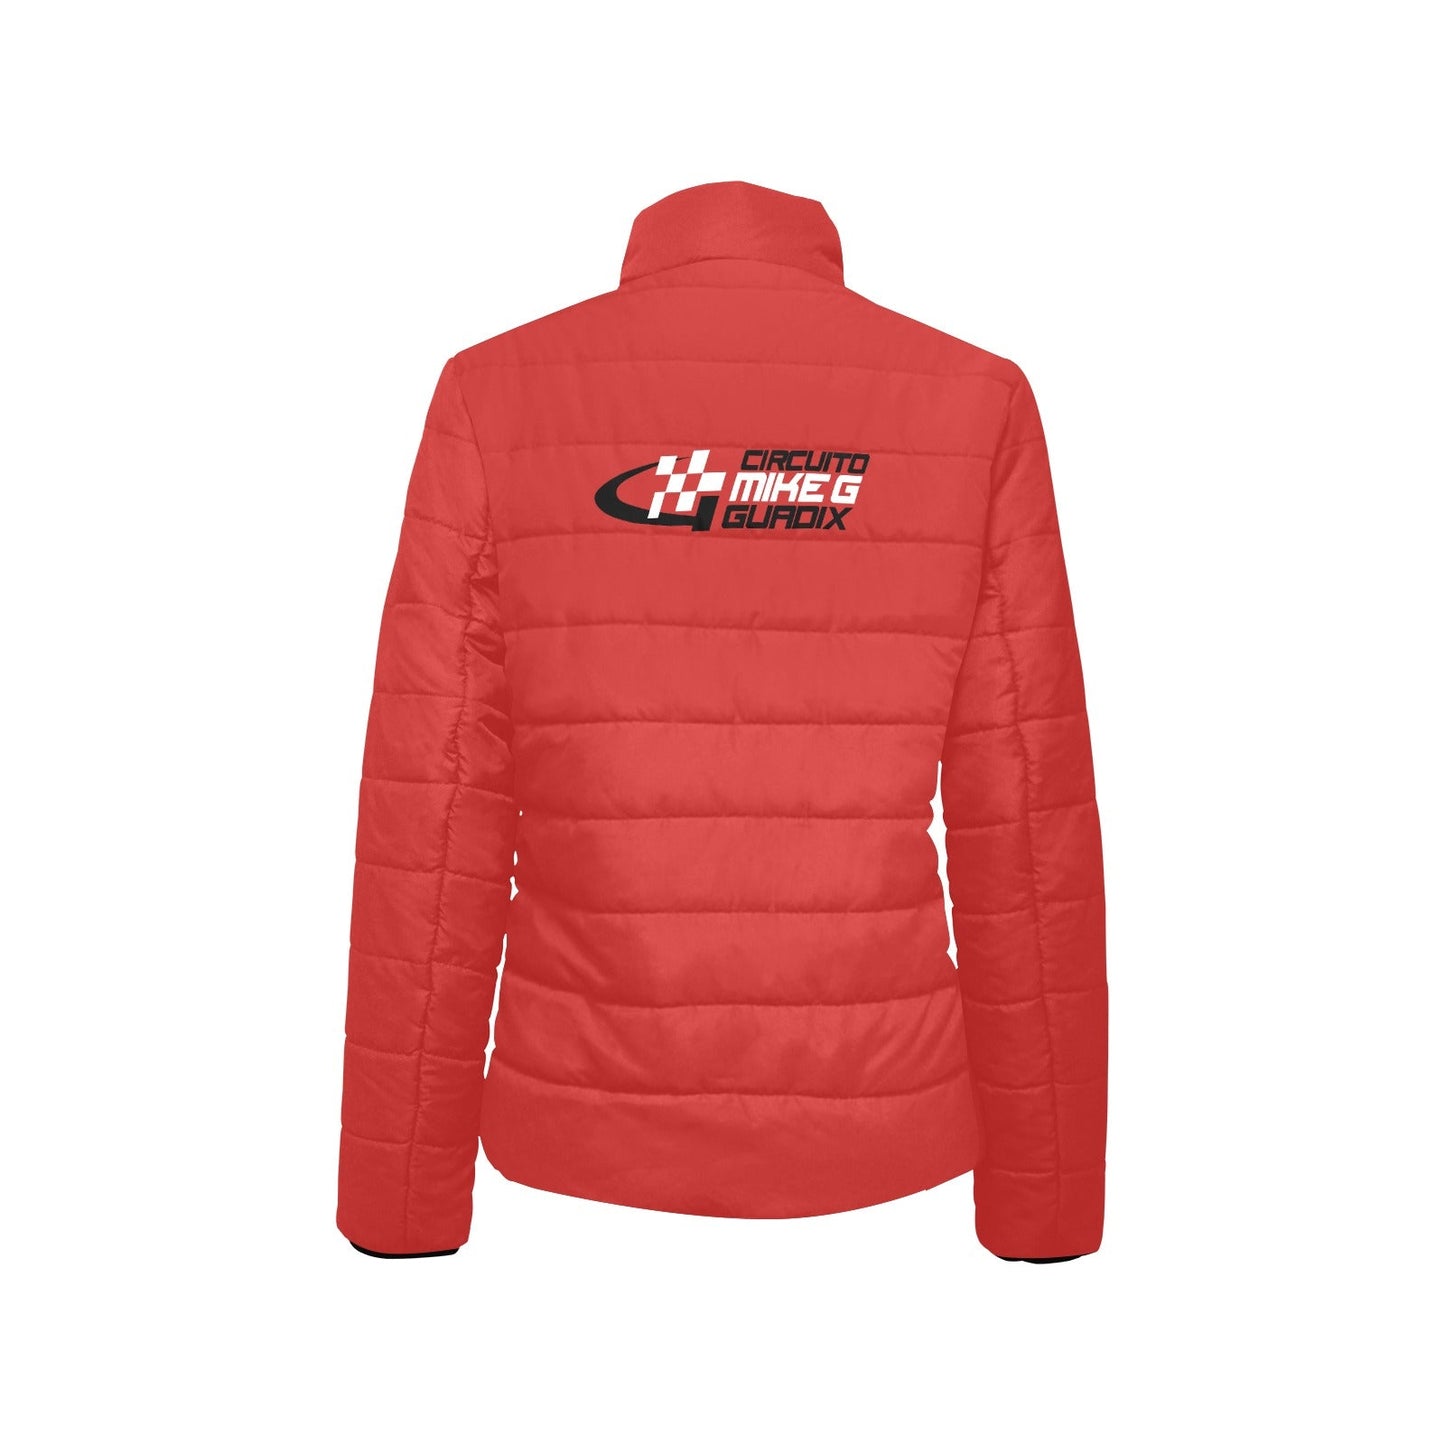 CIRCUITO MIKE G GUADIX Women's quilted puffer jacket - red